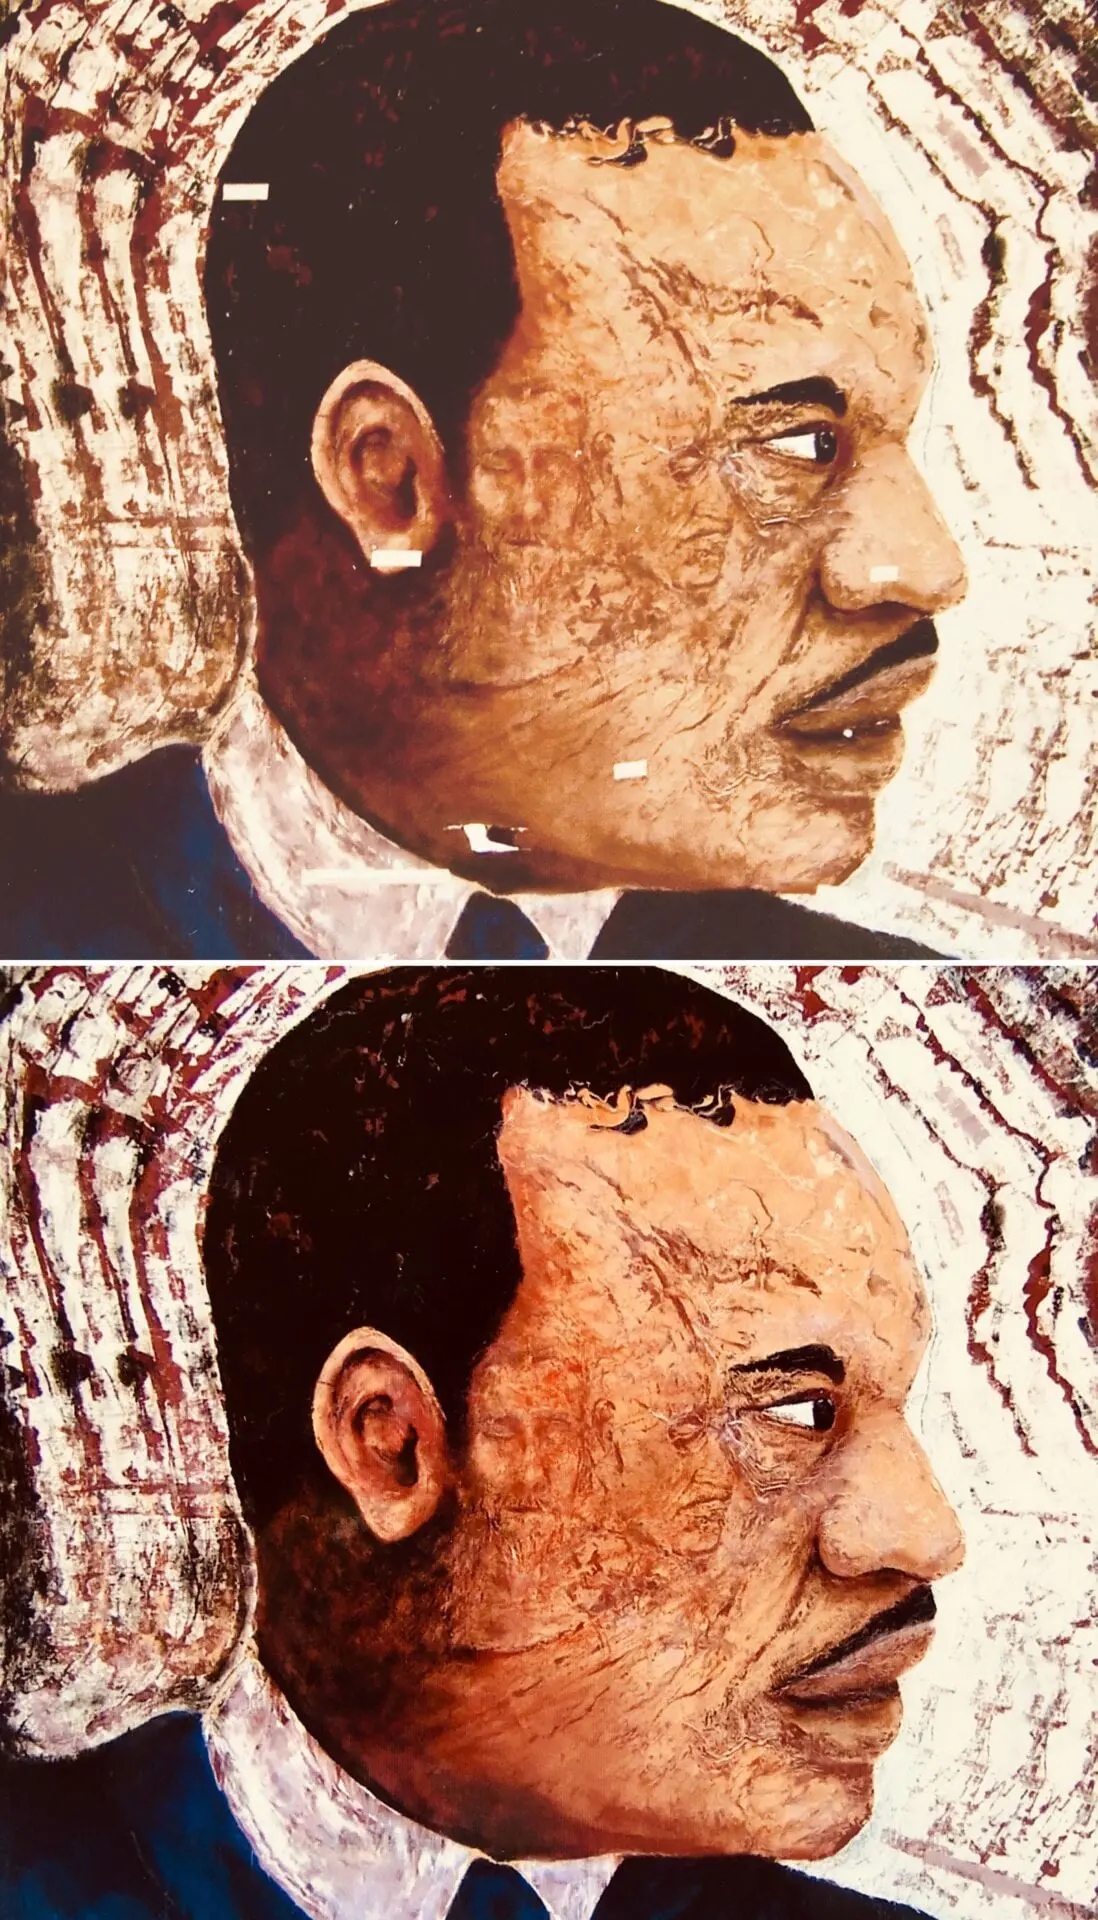 A painting of martin luther king jr. With and without hair